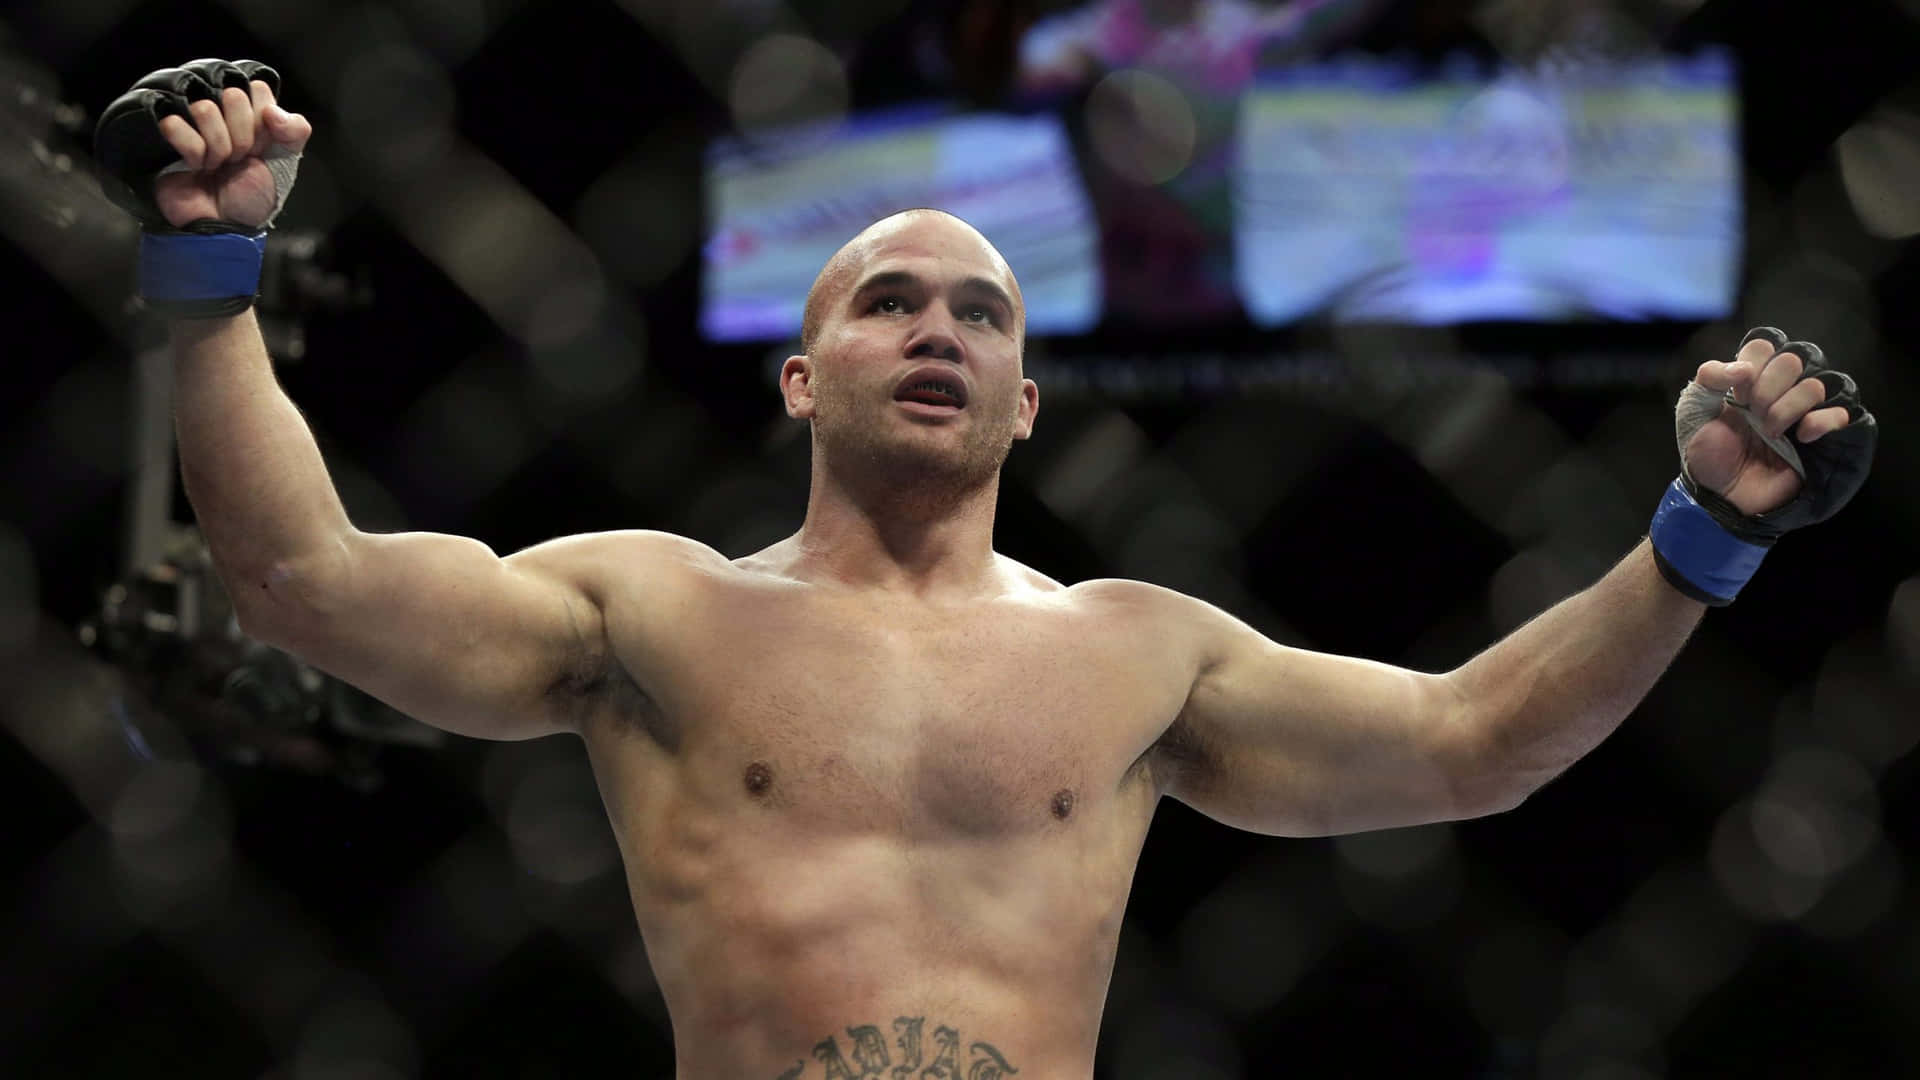 Robbie Lawler in action during UFC 167 Wallpaper